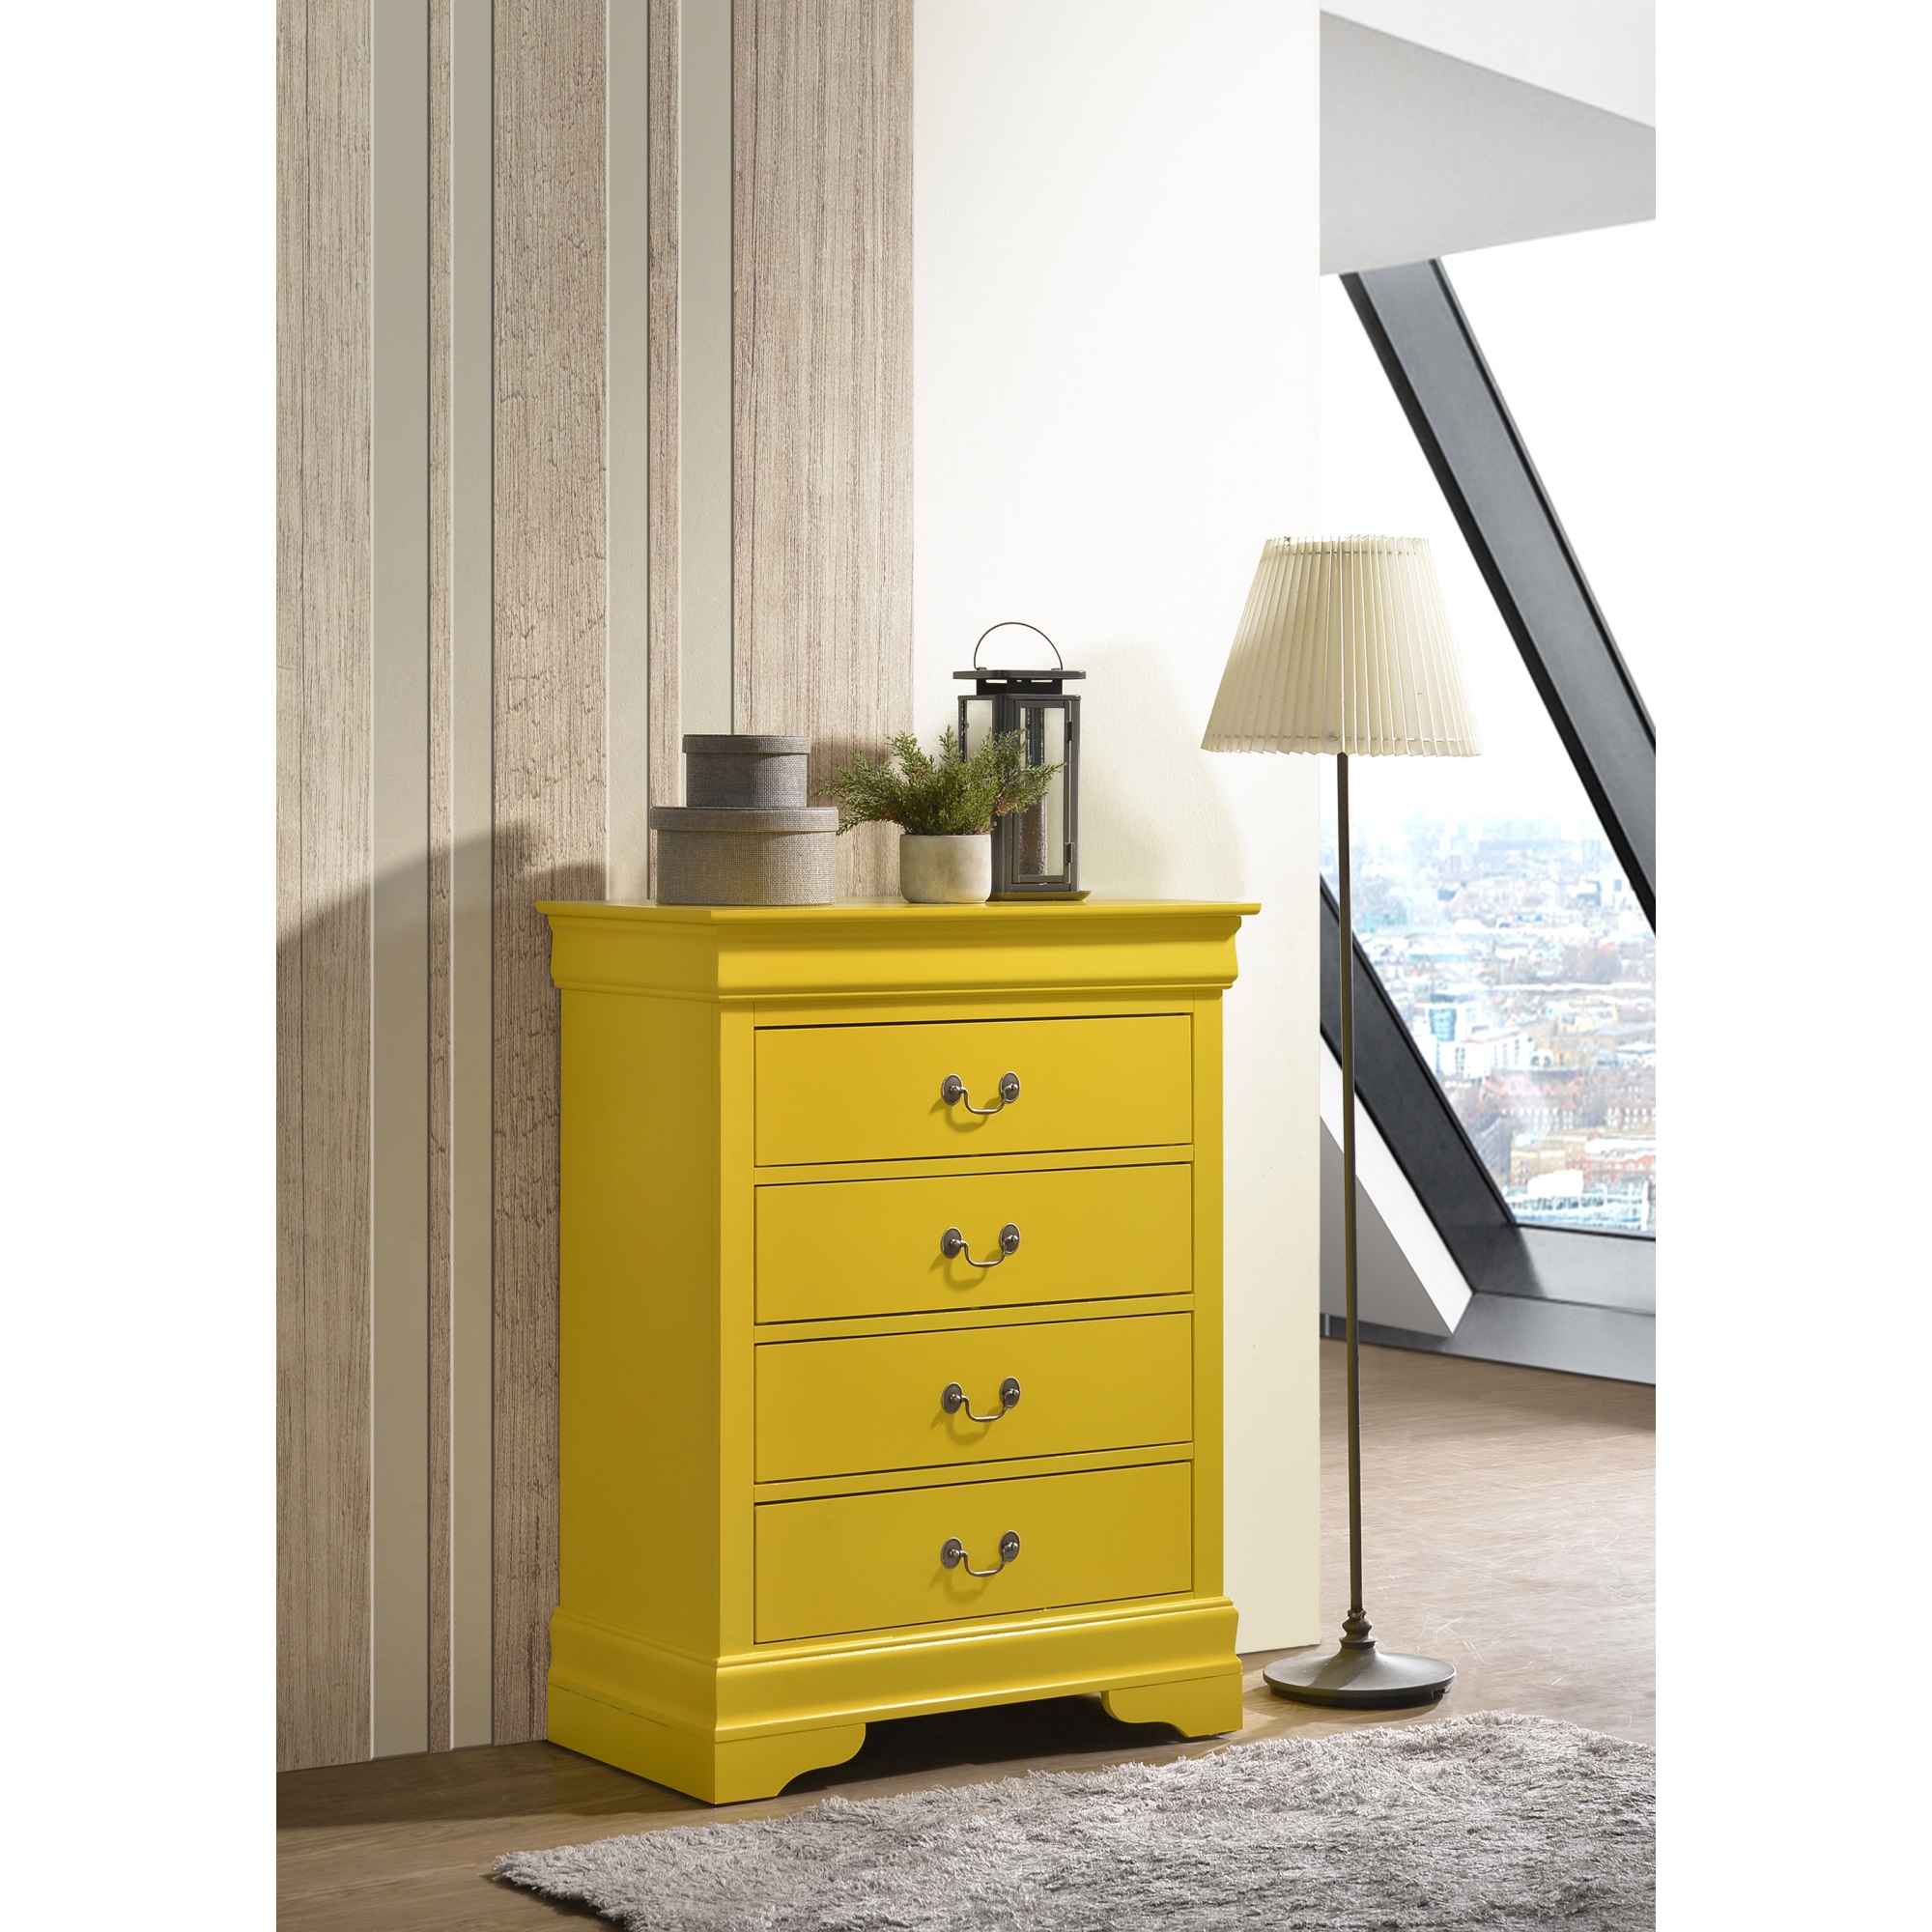 Passion Furniture Louis Phillipe Yellow 4 Drawer Chest of Drawers (41 in L. X 16 in W. X 41 in H.)